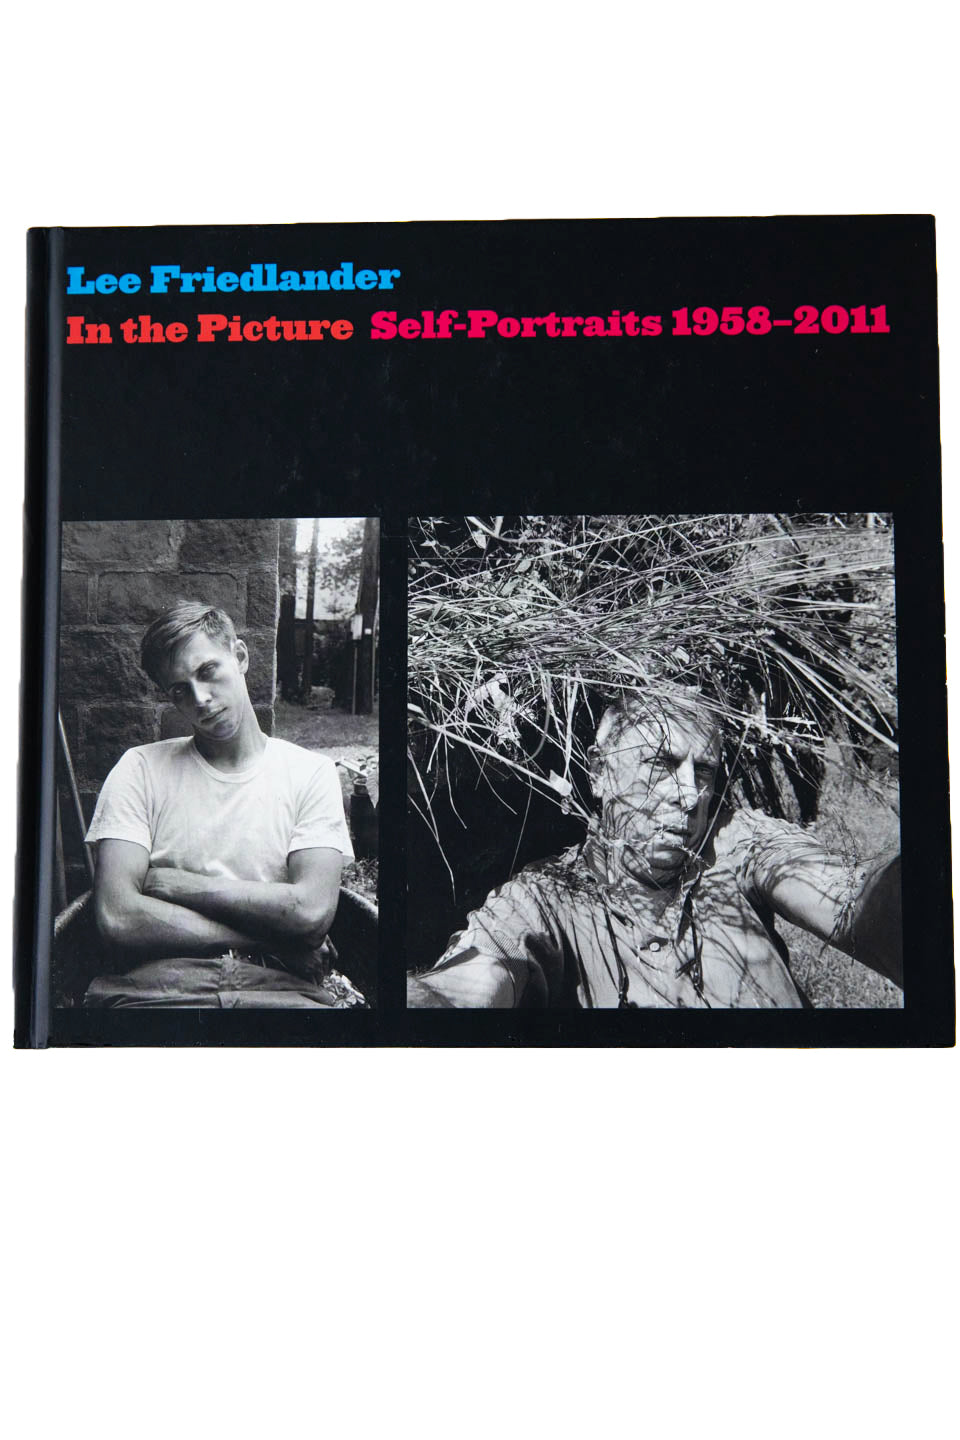 IN THE PICTURE SELF-PORTRAITS 1958-2011